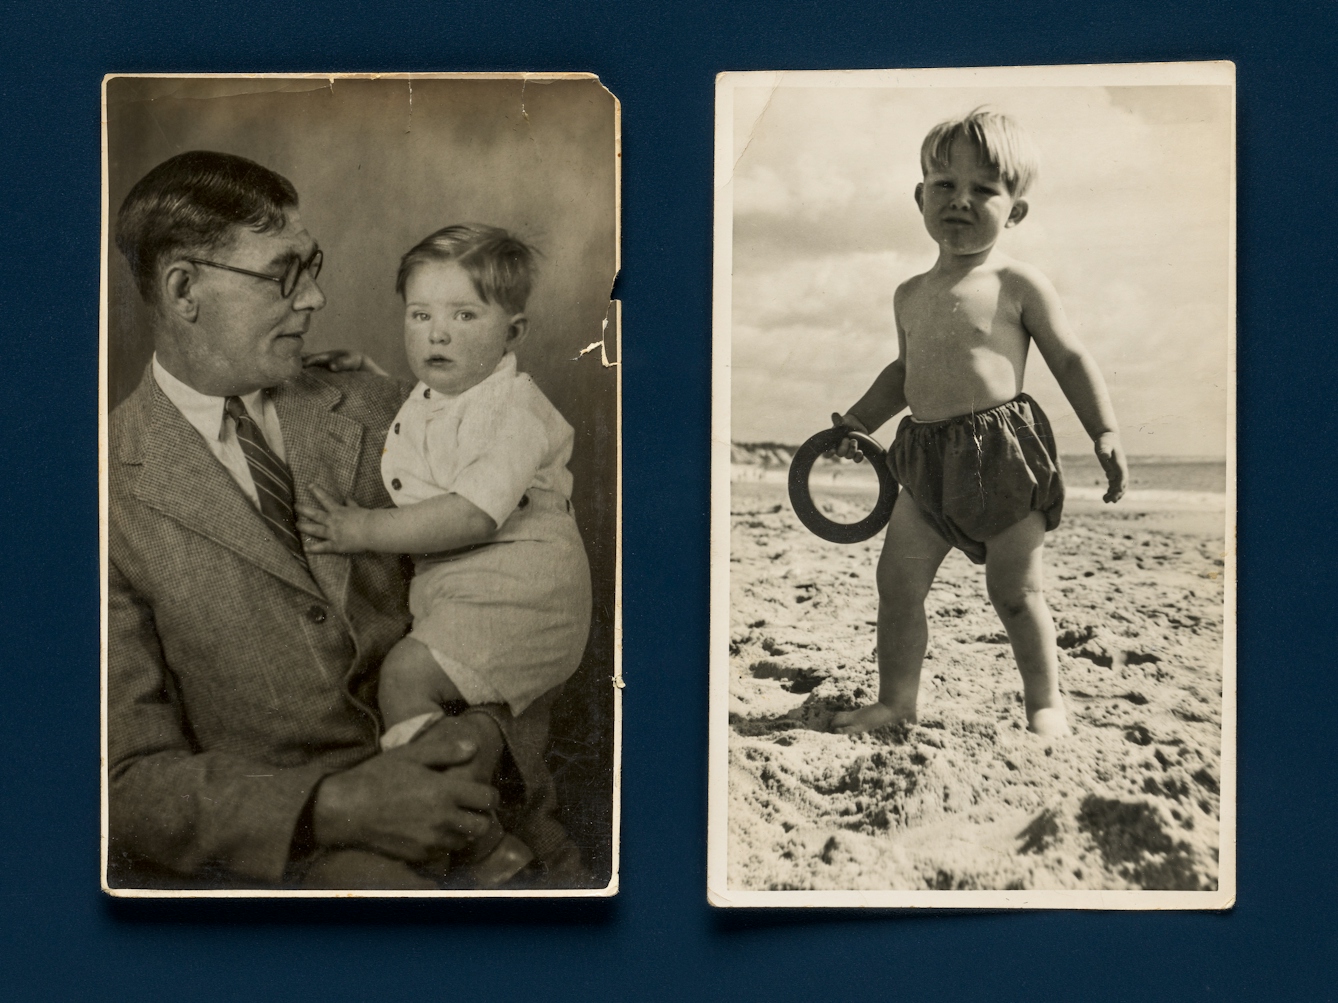 Photograph of 2 sepia toned family photos resting on a deep blue background. The photo on the left is taken in a studio and shows a father holding a young child of 2 or 3 years old. The period is the 1950s and the father wears a suit and tie and glasses. The photo on the right shows the same child, but this time on a sandy beach in sunshine, wearing a swimming costume. They are holding a hoop in one hand and looking to camera.